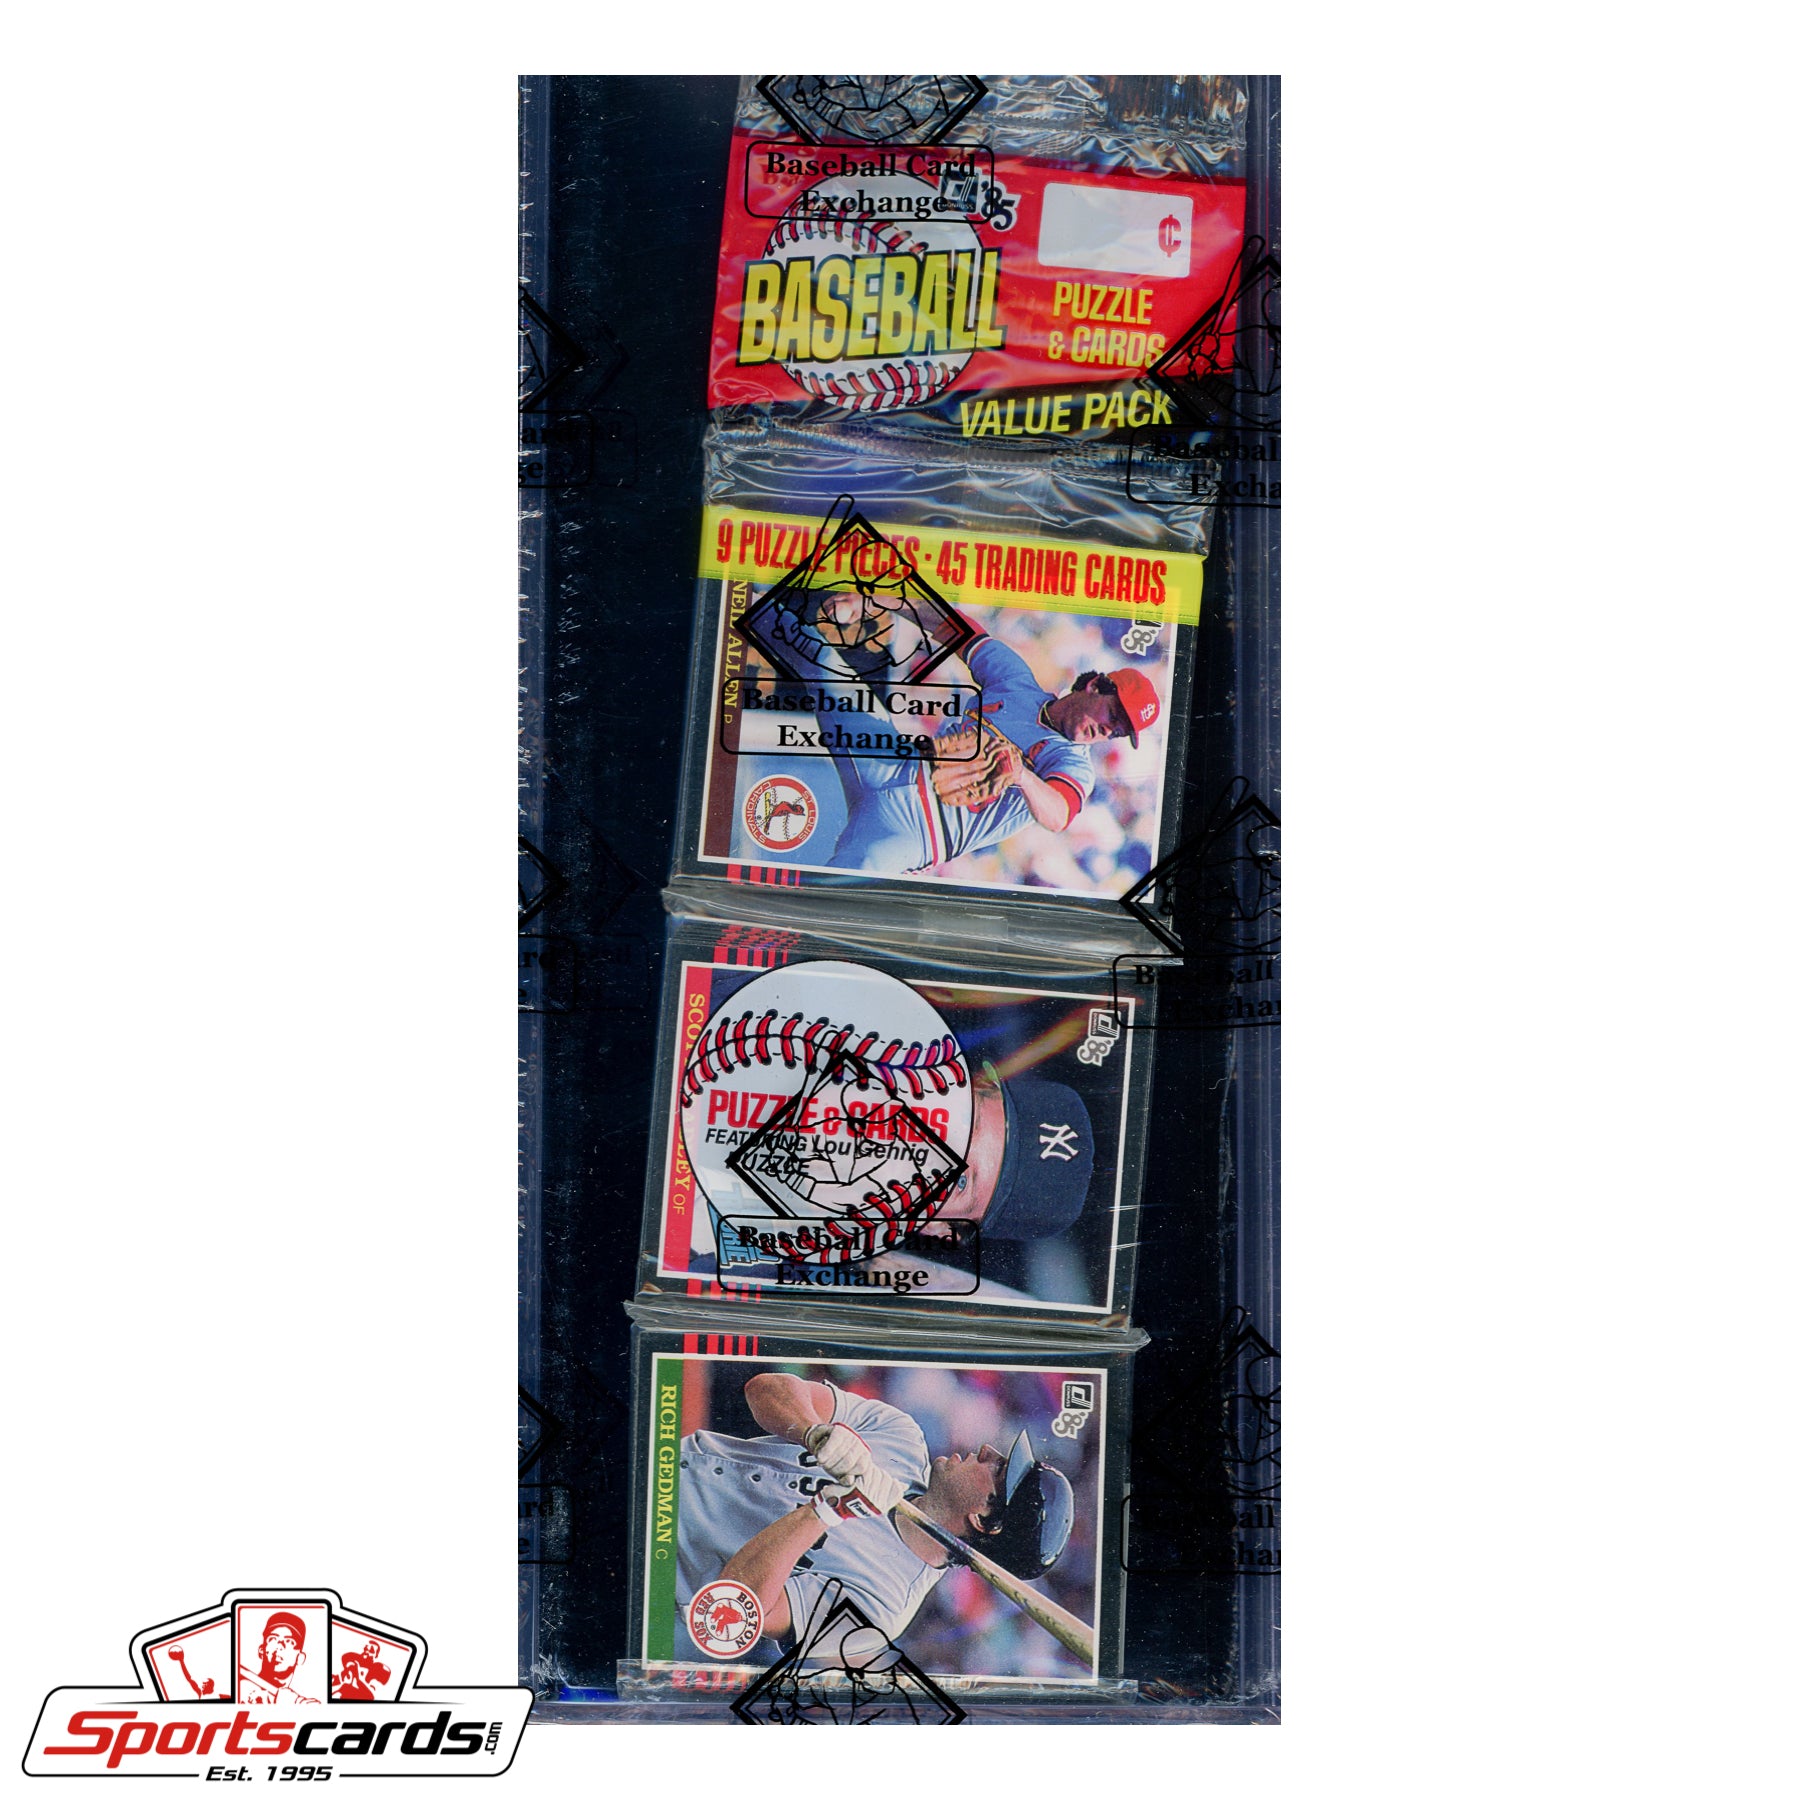 1985 Donruss Baseball Rack Pack BBCE Certified - Possible Kirby Puckett and Roger Clemens